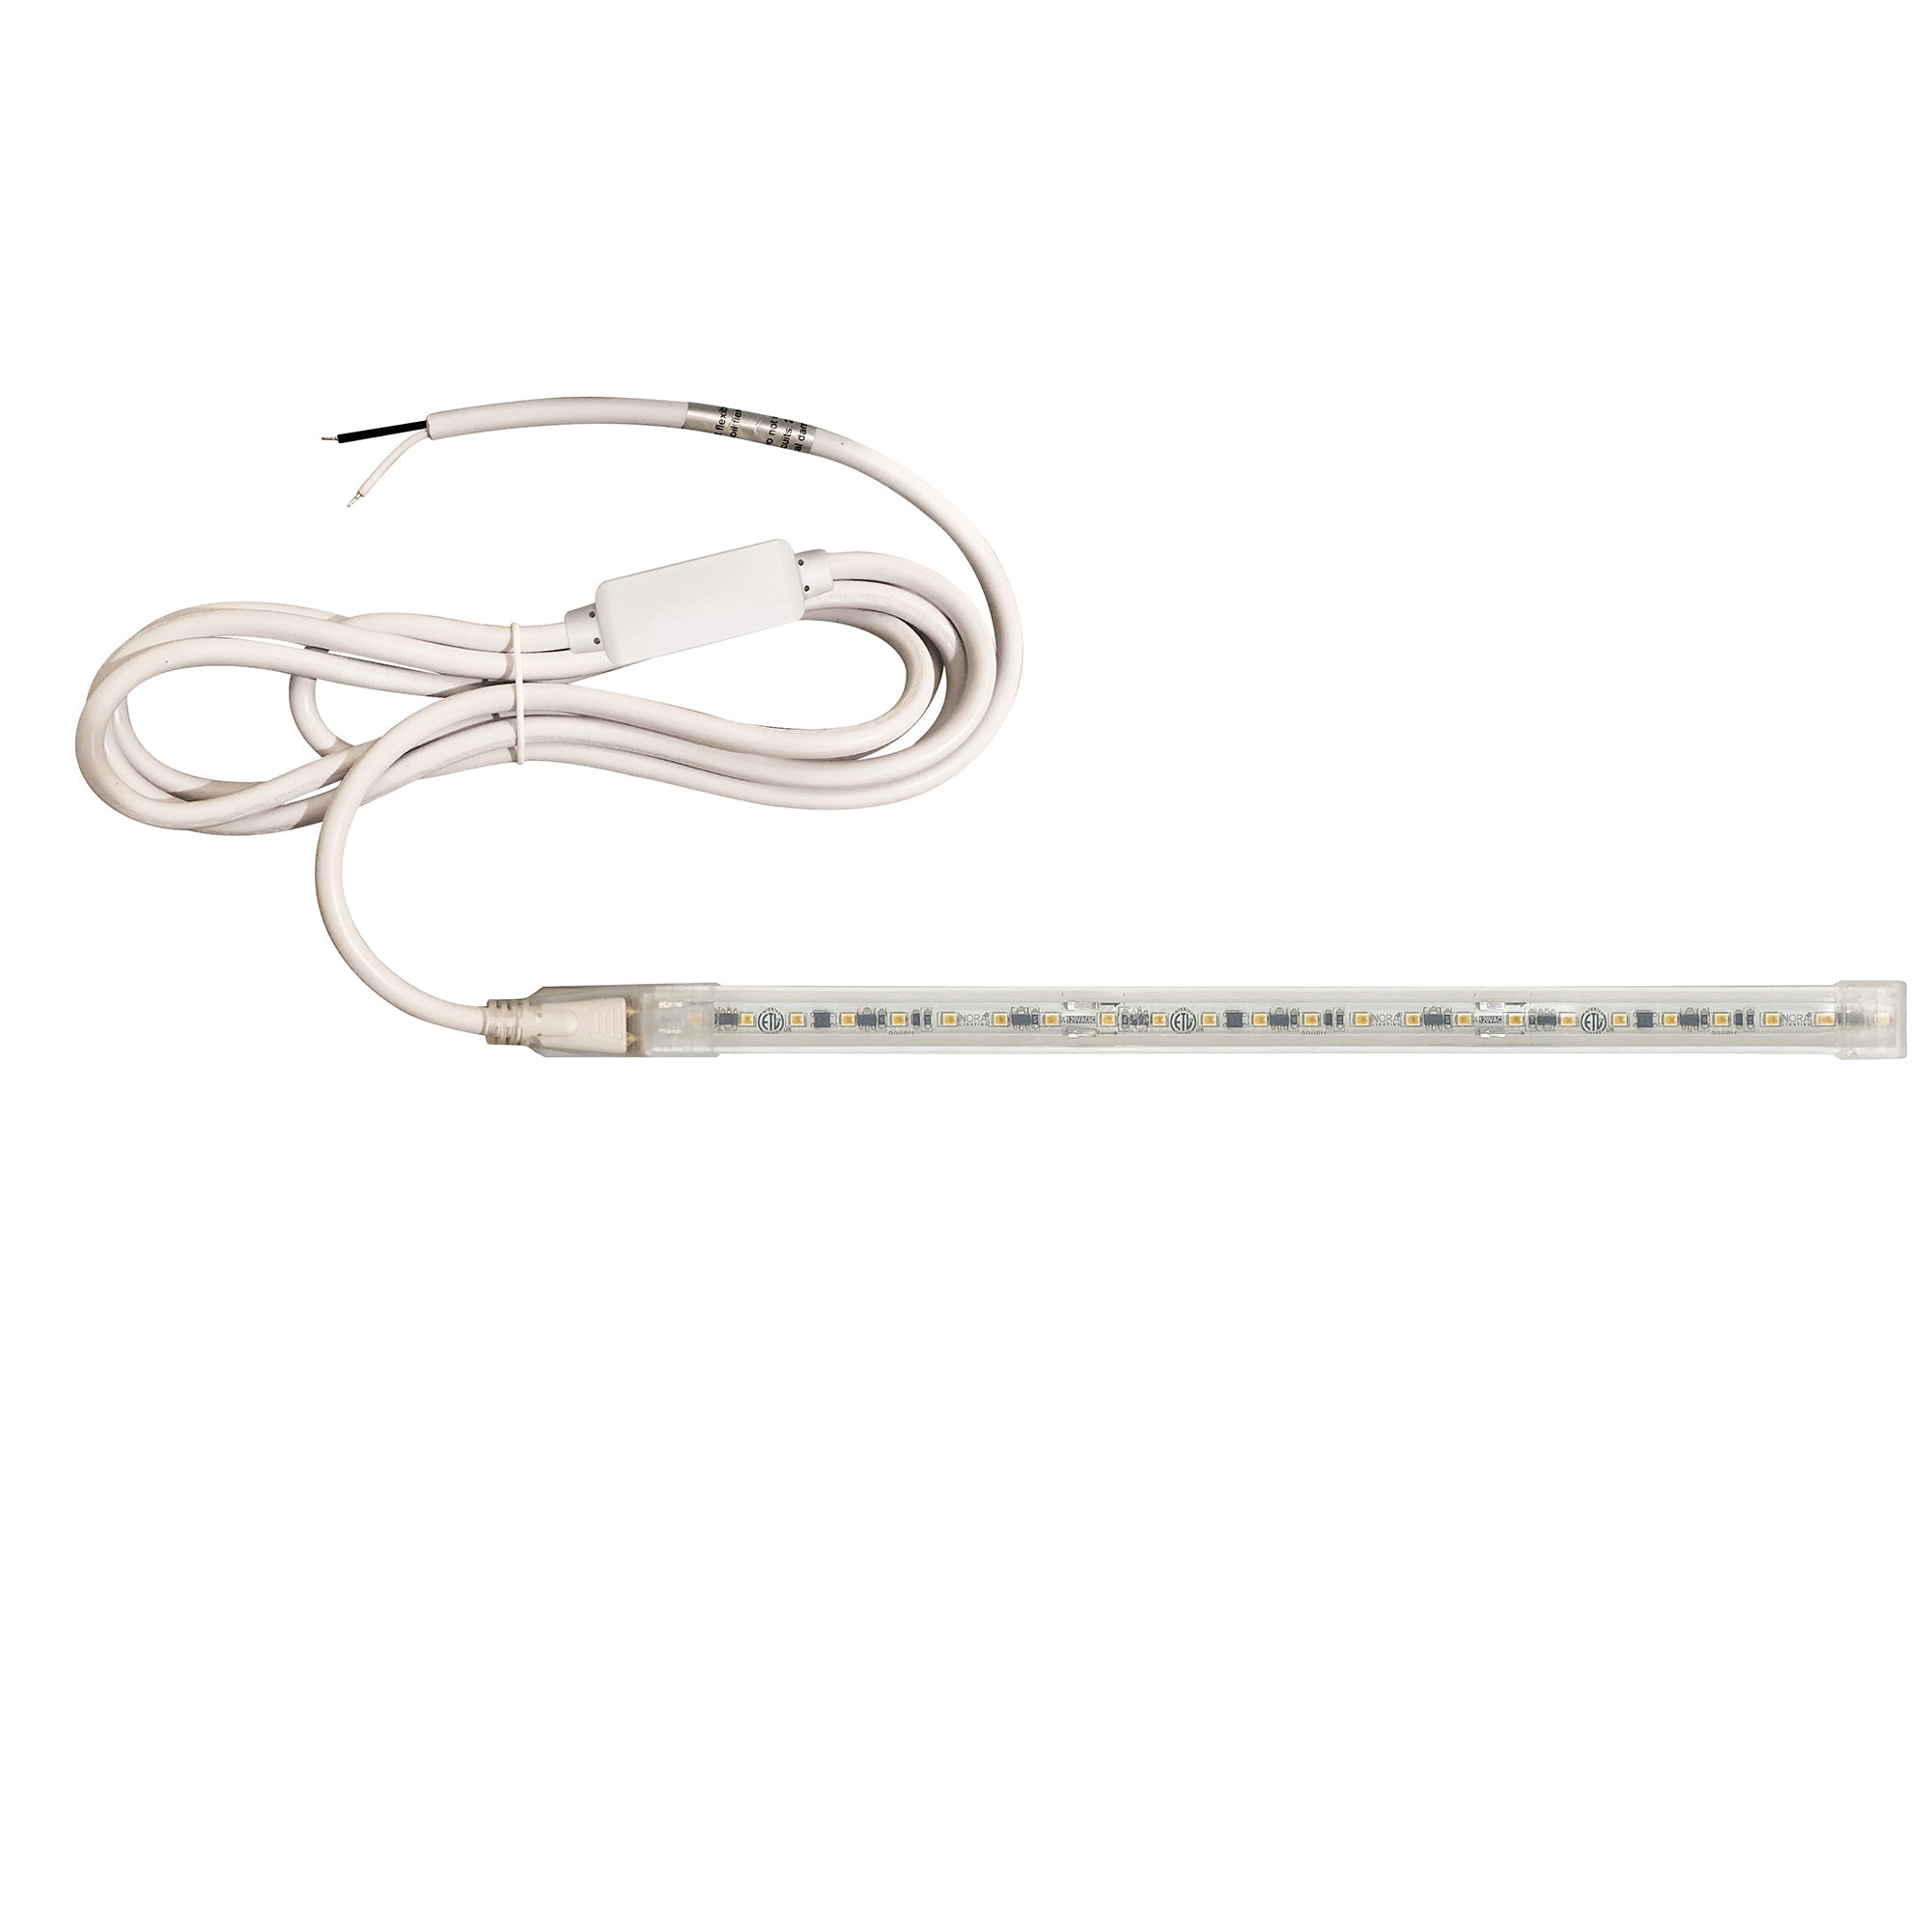 Nora Lighting NUTP13-W62-4-12-930/HWSP - Accent / Undercabinet - Custom Cut 62-ft, 4-in 120V Continuous LED Tape Light, 330lm / 3.6W per foot, 3000K, w/ Mounting Clips and 8' Hardwired Power Cord w/ Surge Protector